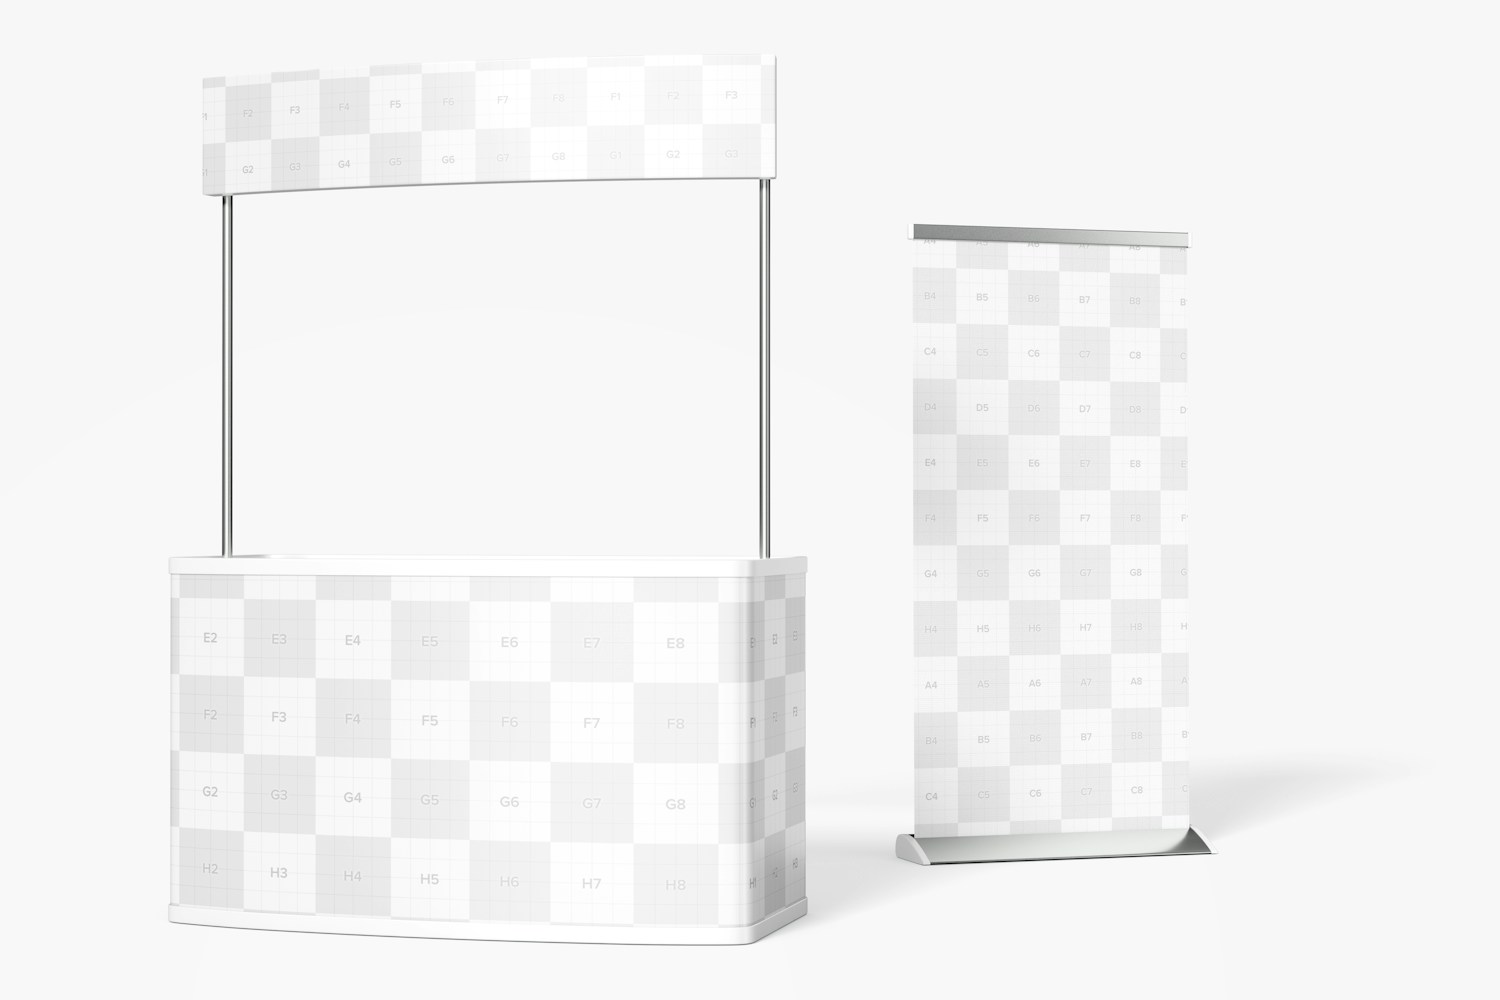 Large Promo Stand with Roll-Up Banner Mockup